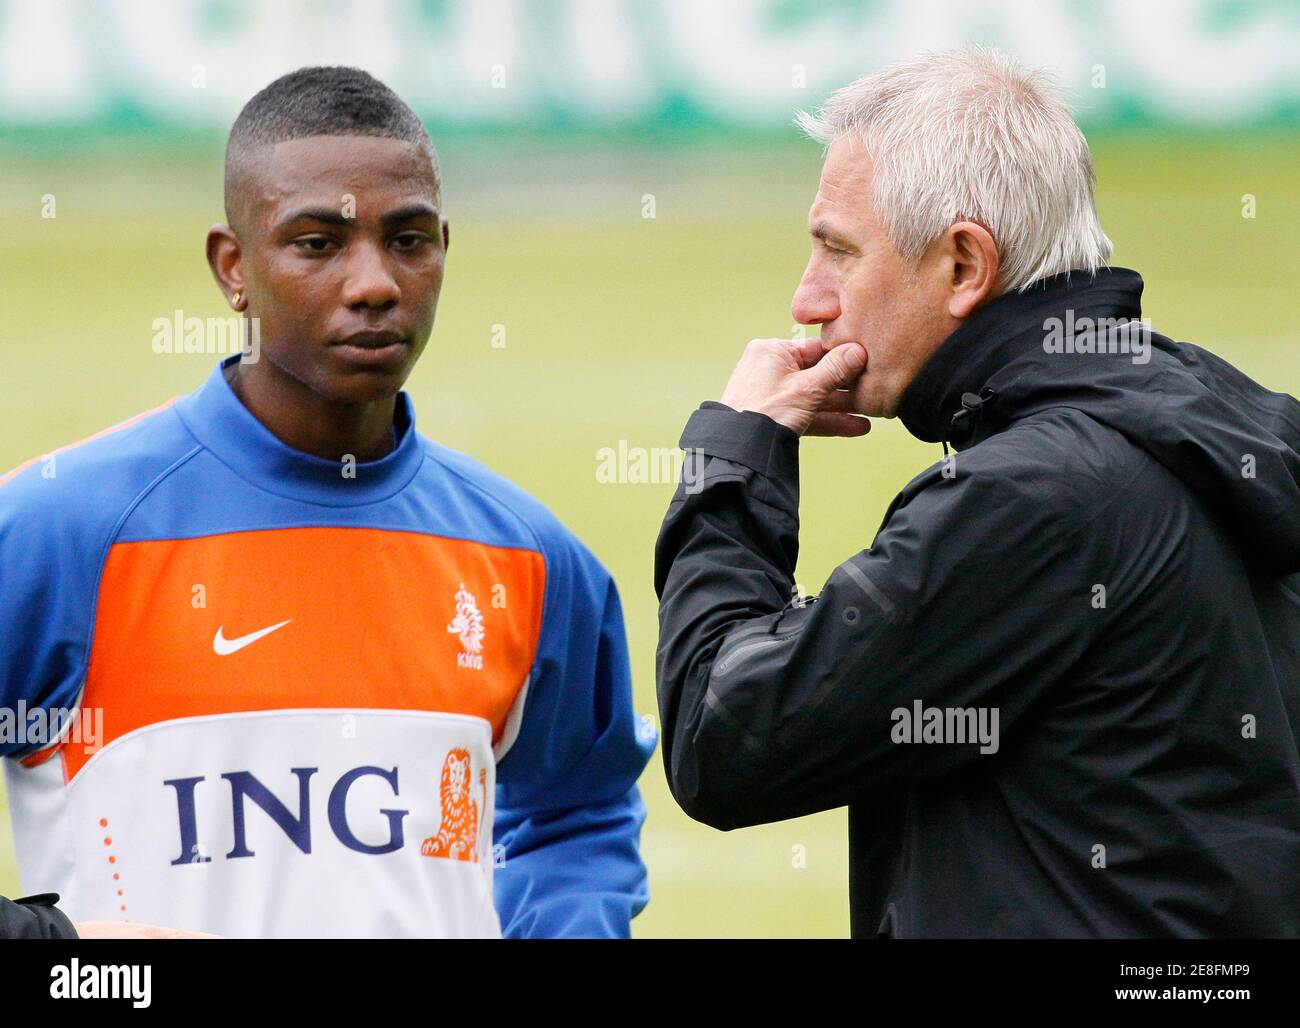 Head coach of the Dutch national soccer team Bert van Marwijk (R) speaks  with player Erjero Elia during a training session in Hoenderloo May 14, 2010.  The Dutch team was drawn into